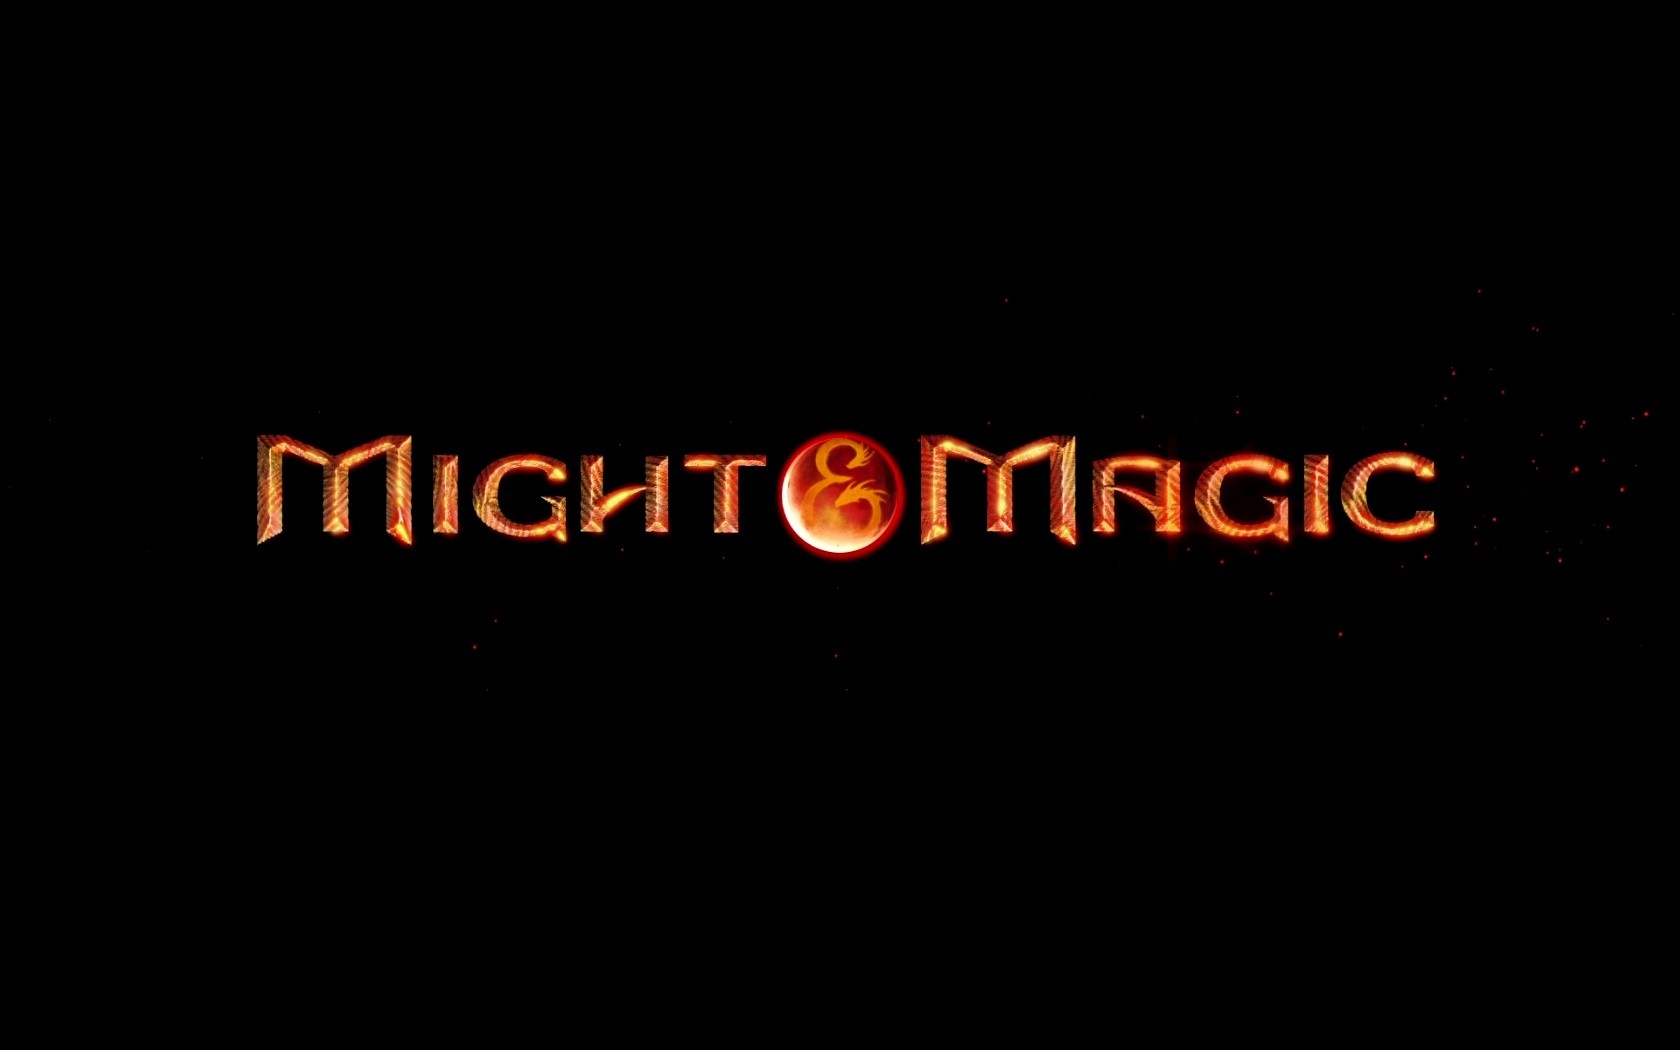 Video Games Heroes Of Might And Magic Might And Magic 1680x1050